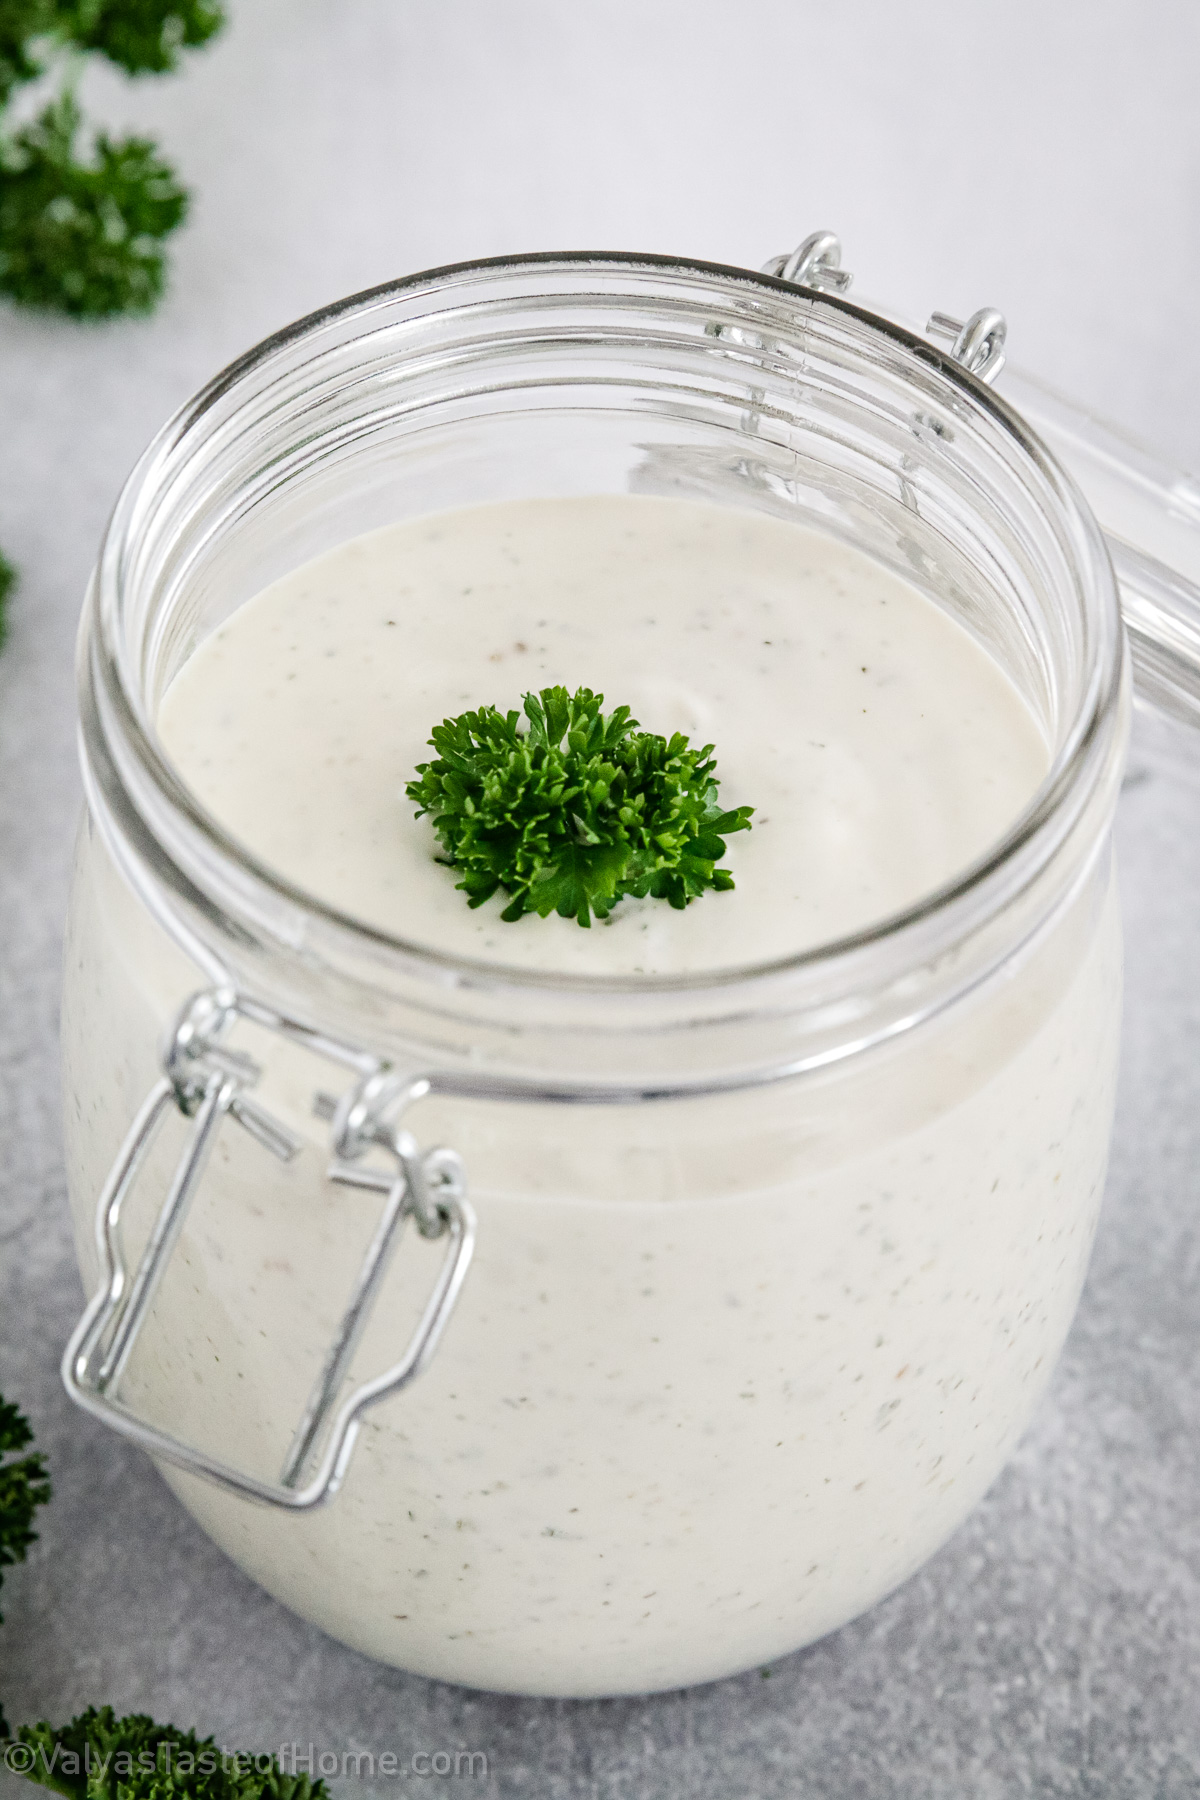 This Ranch Dressing Recipe will give you a delicious homemade salad dressing that's creamy, tangy, and tastes like the store-bought versions if not better!